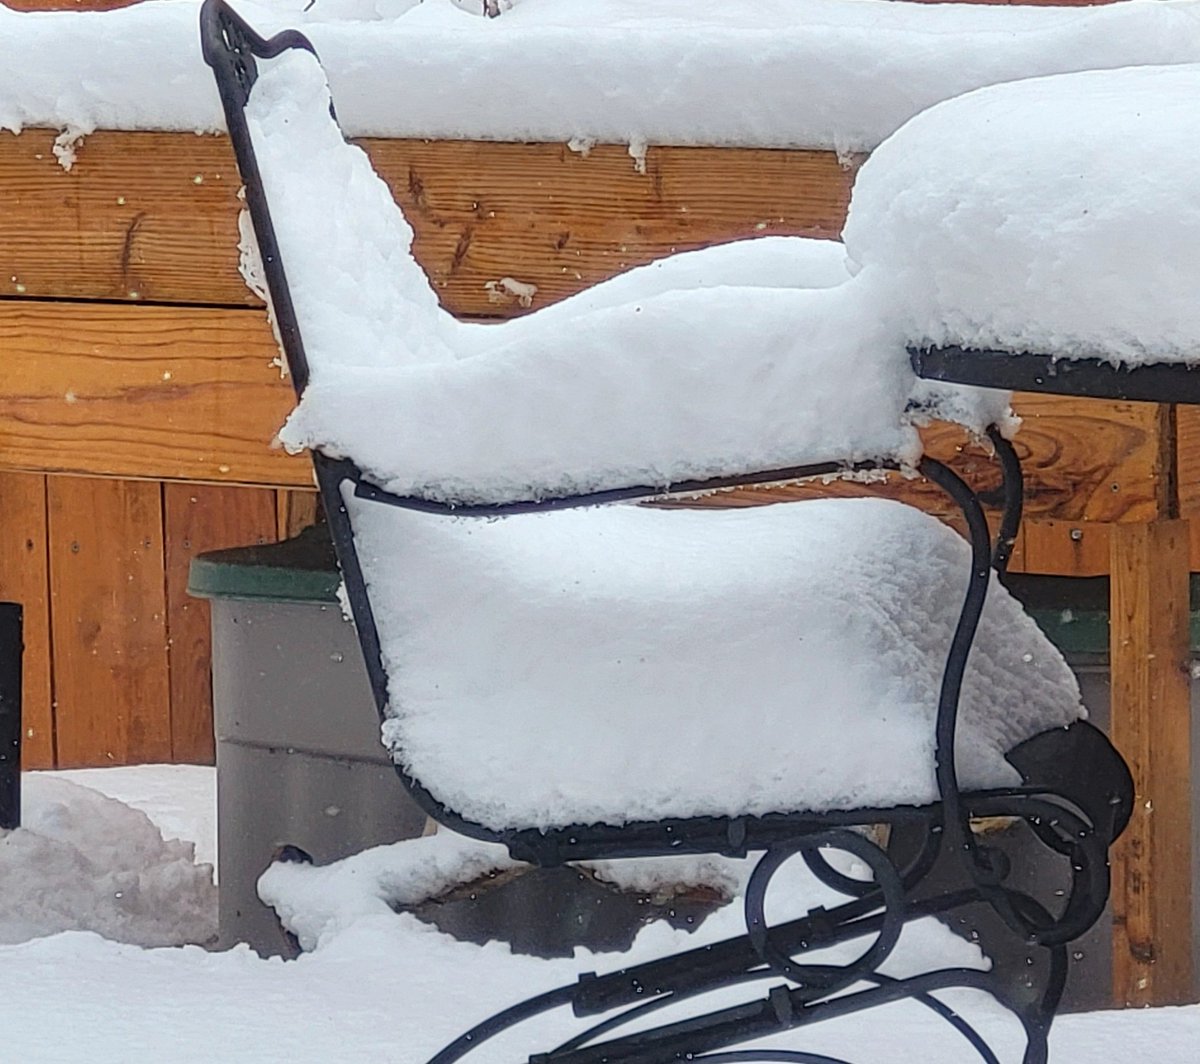 @mototingle Tell them to have a seat and chill tf out my friend 😂 ❄️ 💙 Life's too short for that 💩 🤣 #Colorado today ❄️☃️❄️😂